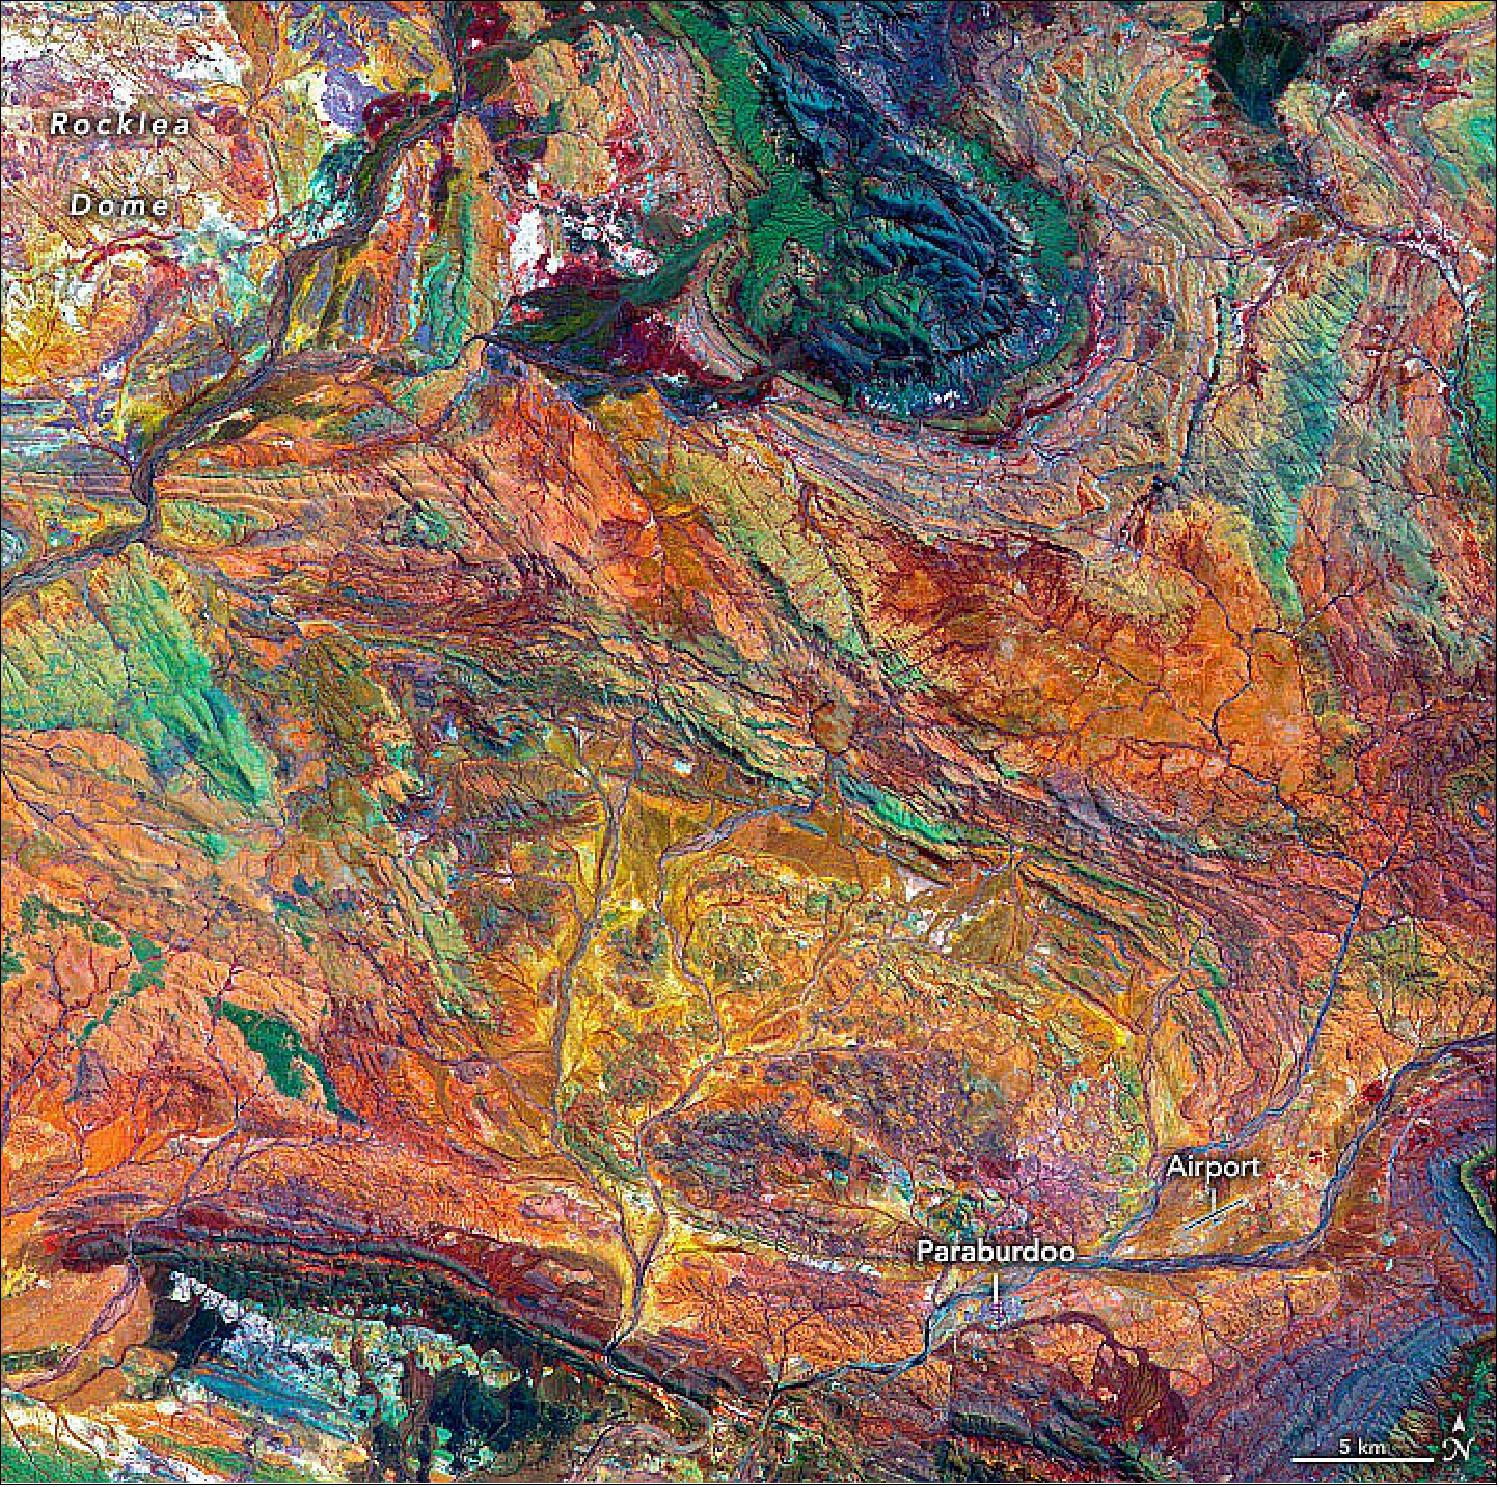 Figure 21: The image was acquired by the Advanced Spaceborne Thermal Emission and Reflection Radiometer (ASTER) on NASA’s Terra satellite on October 12, 2004. It is a composite of ASTER bands 4-2-1. These bands detect shortwave-infrared light, near-infrared and visible red light, and green light, which are displayed as red, green, and blue, respectively. In this display, iron-rich rocks appear yellow to green. Light-colored, iron-poor rocks appear white, while dark-colored iron-poor rocks are dark blue. Areas with more vegetation cover appear dark red. This is because plants reflect more near-infrared than green light. A linear contrast stretch has also been applied to the image to enhance the color contrast and help distinguish rock types (image credit: NASA Earth Observatory image by Joshua Stevens, using data from NASA/METI/AIST/Japan Space Systems, and the U.S./Japan ASTER Science Team. Story by Sara E. Pratt)